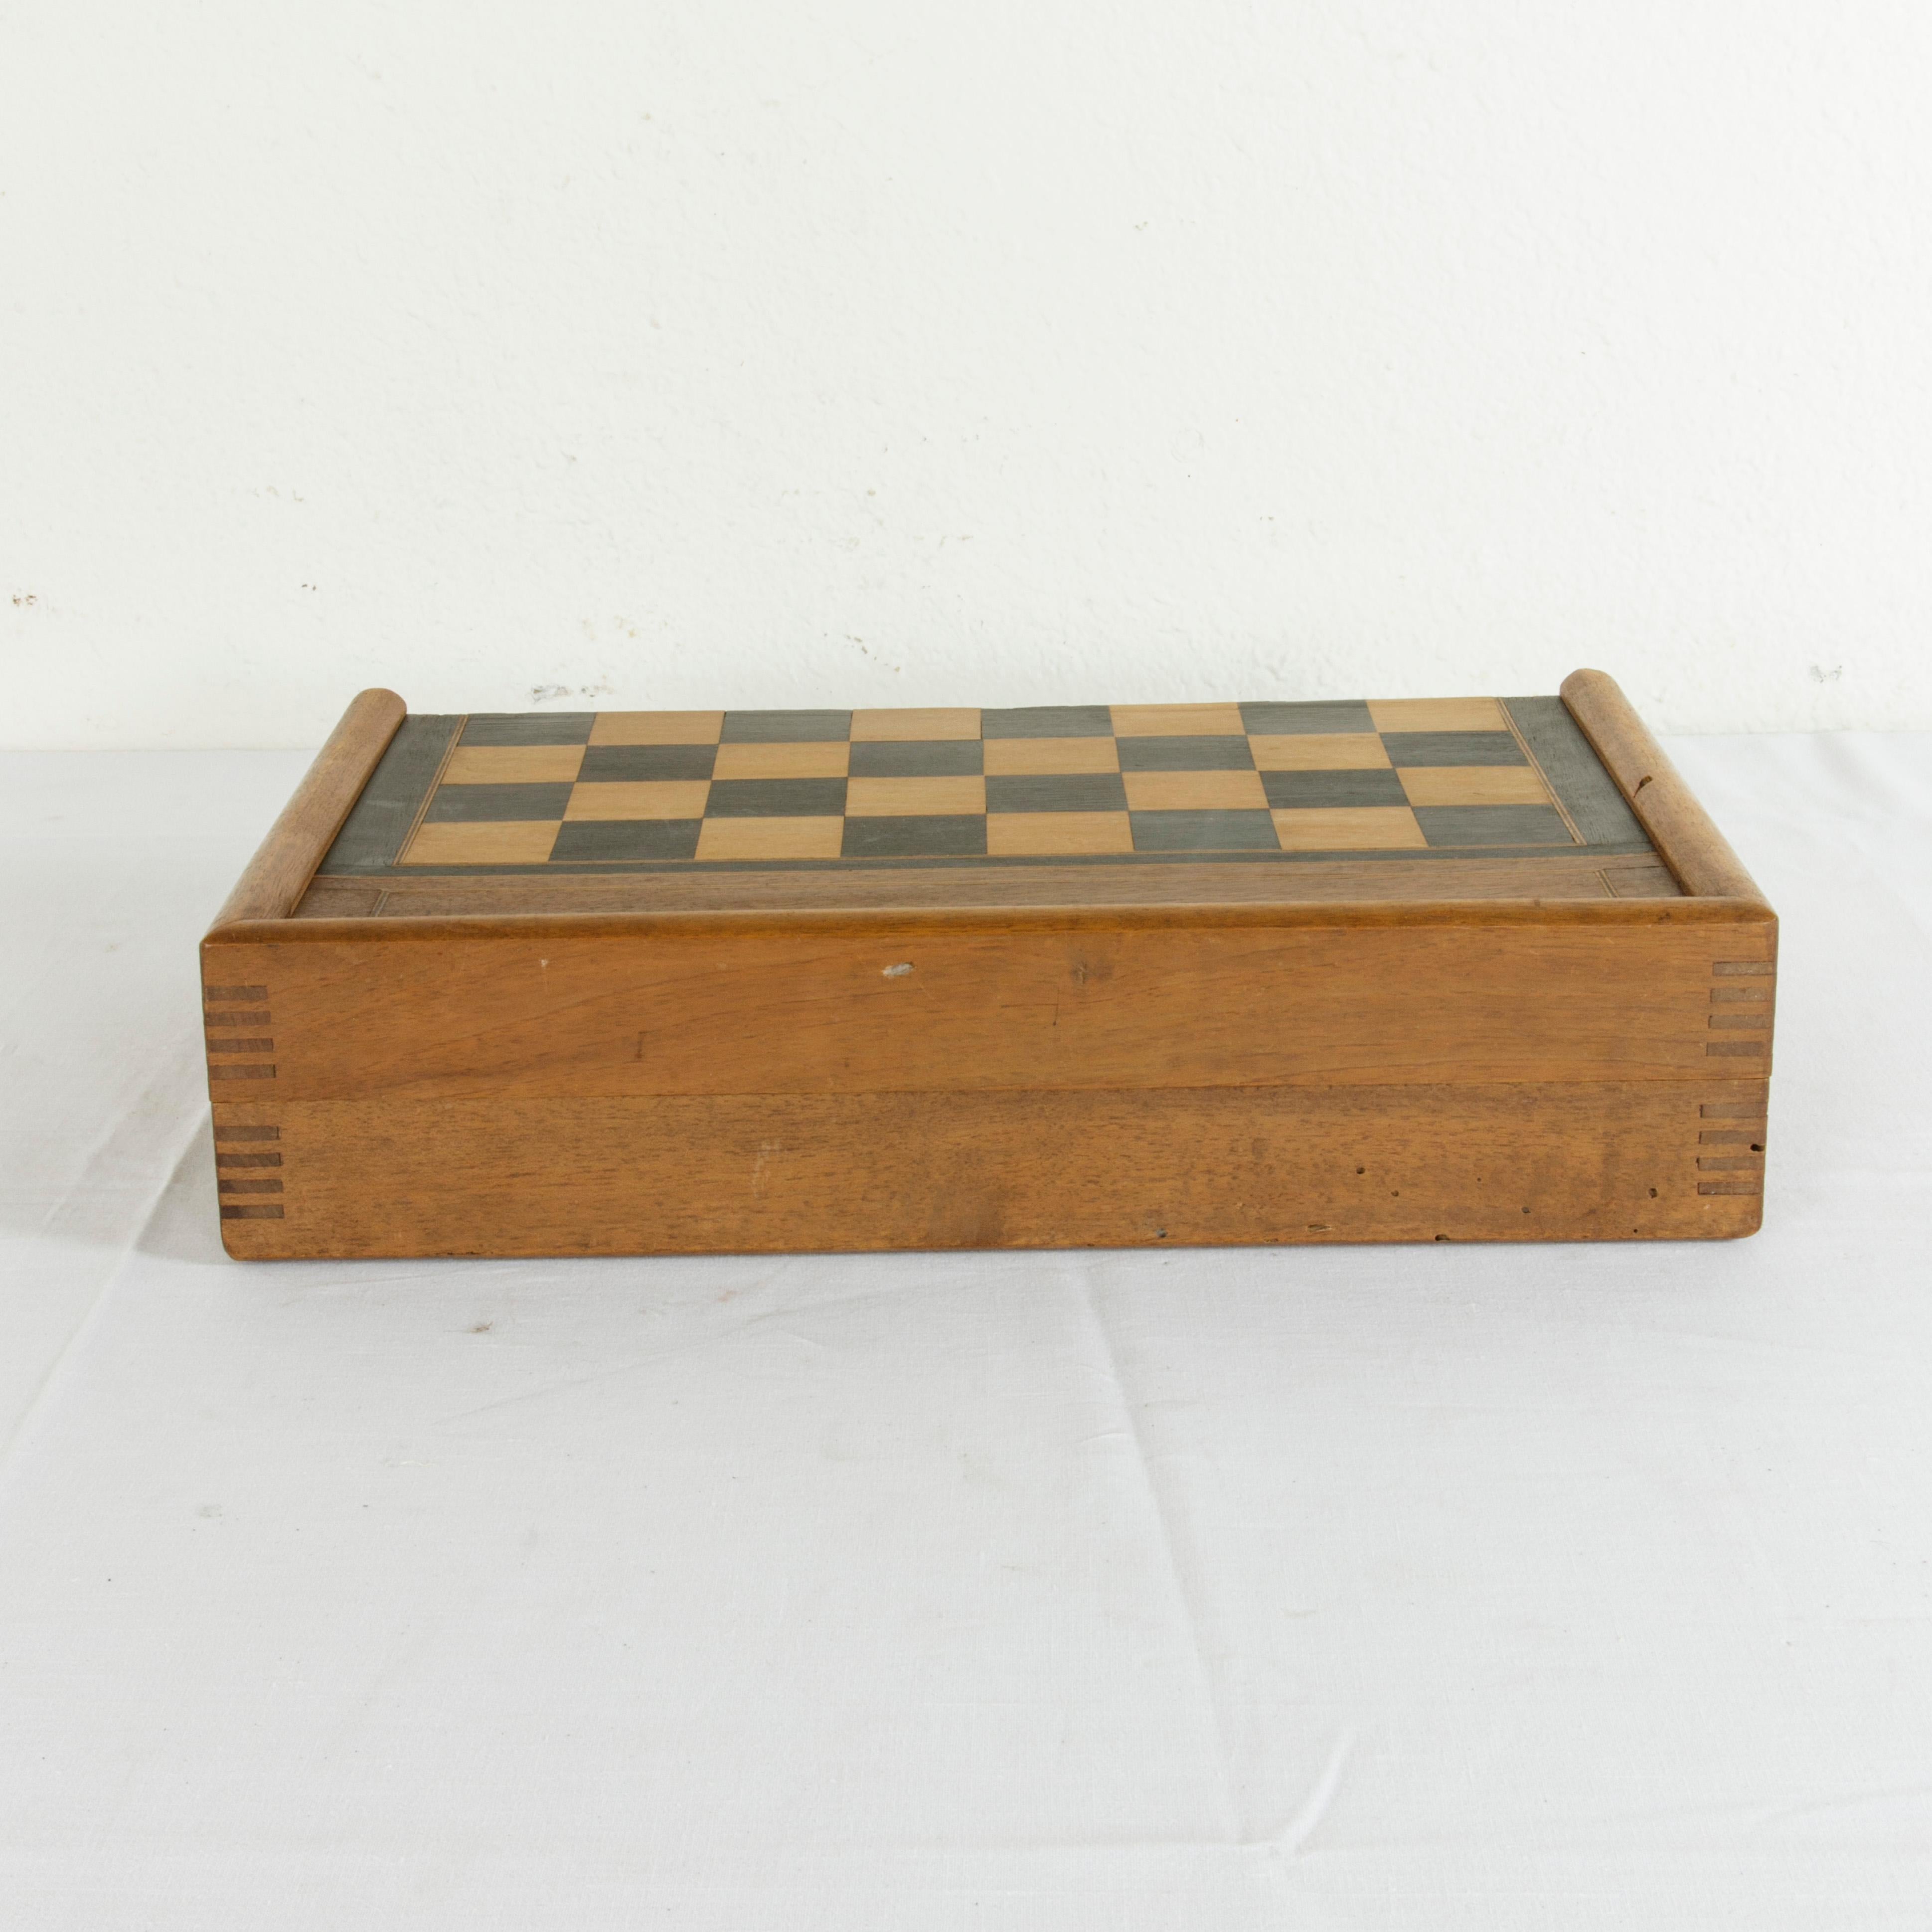 French Walnut Marquetry Folding Game Box, with Reverse Side Backgammon, circa 1900